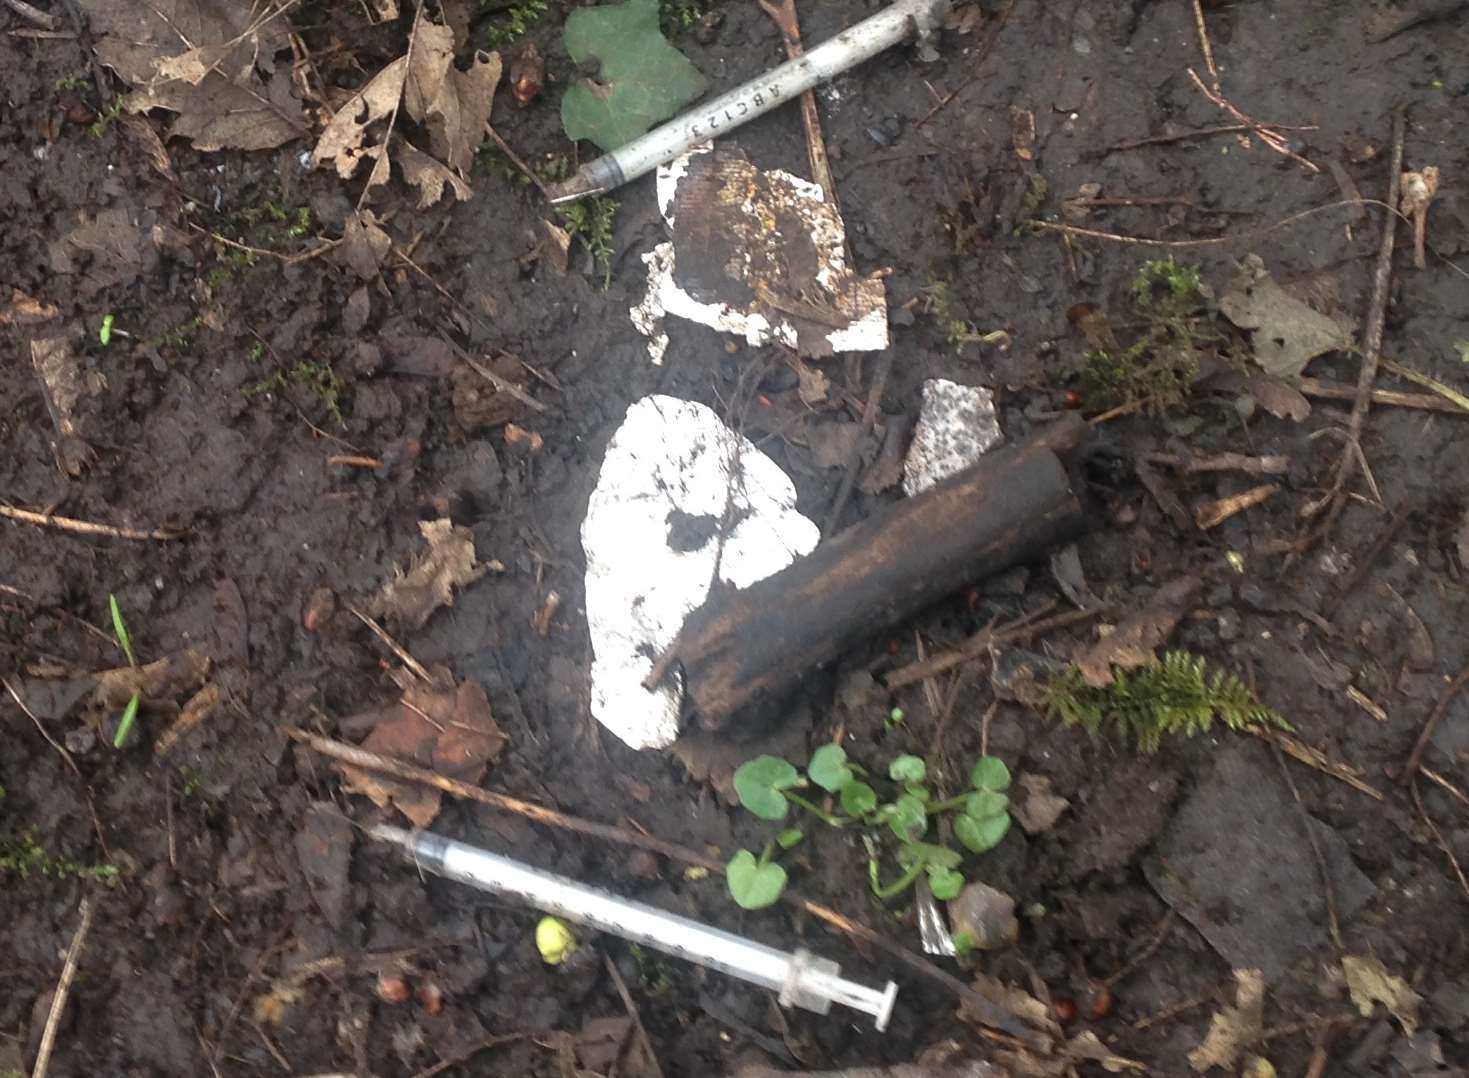 Syringes have been found in the woods in Faversham